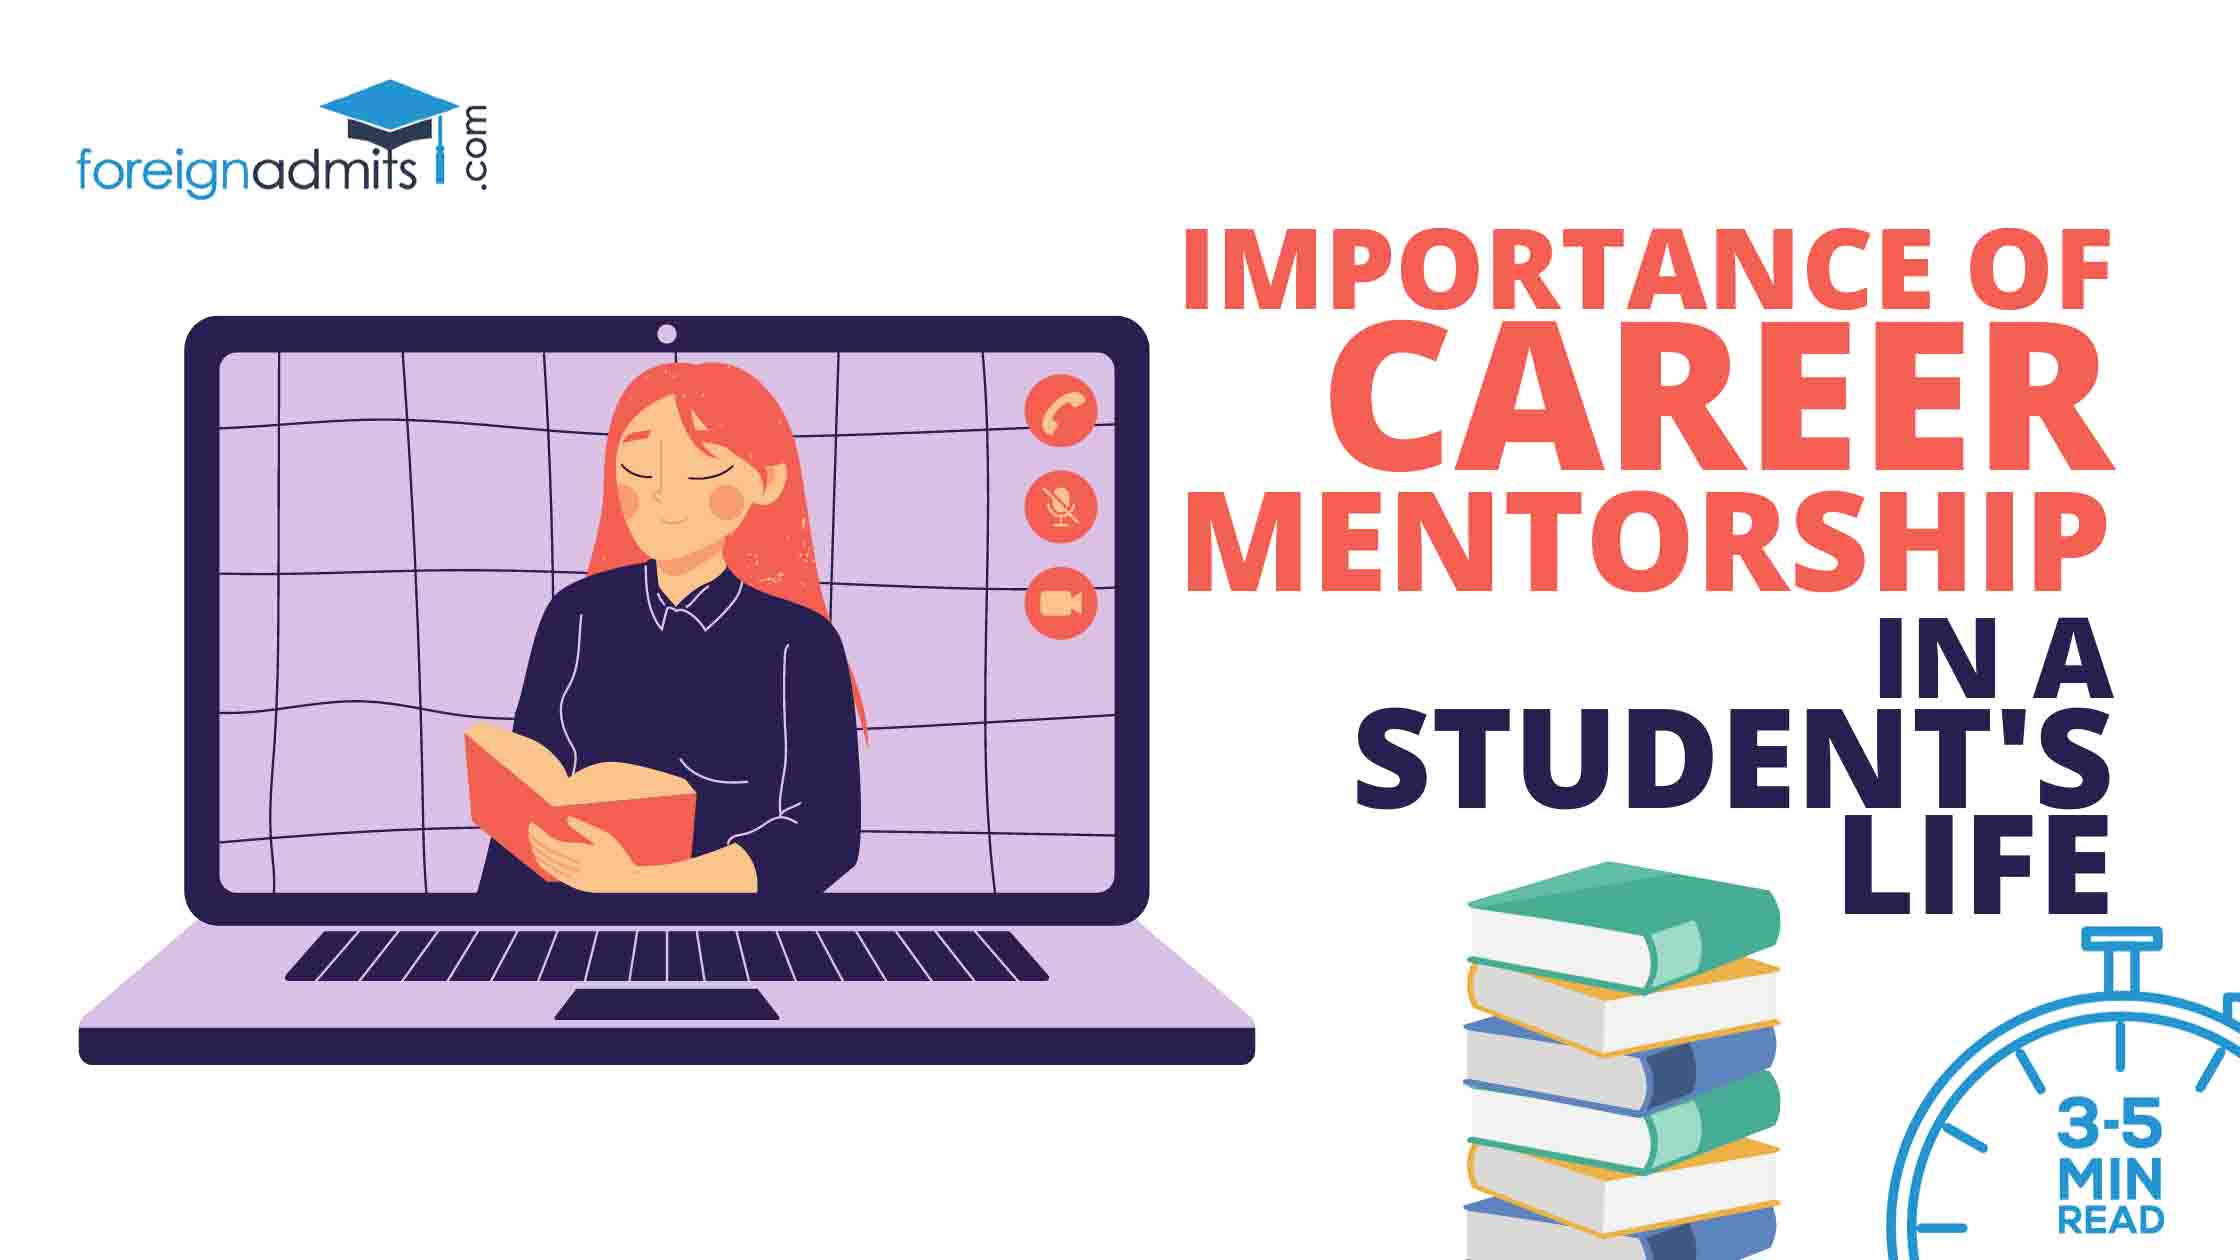 Importance of Career Mentorship in a Student’s Life